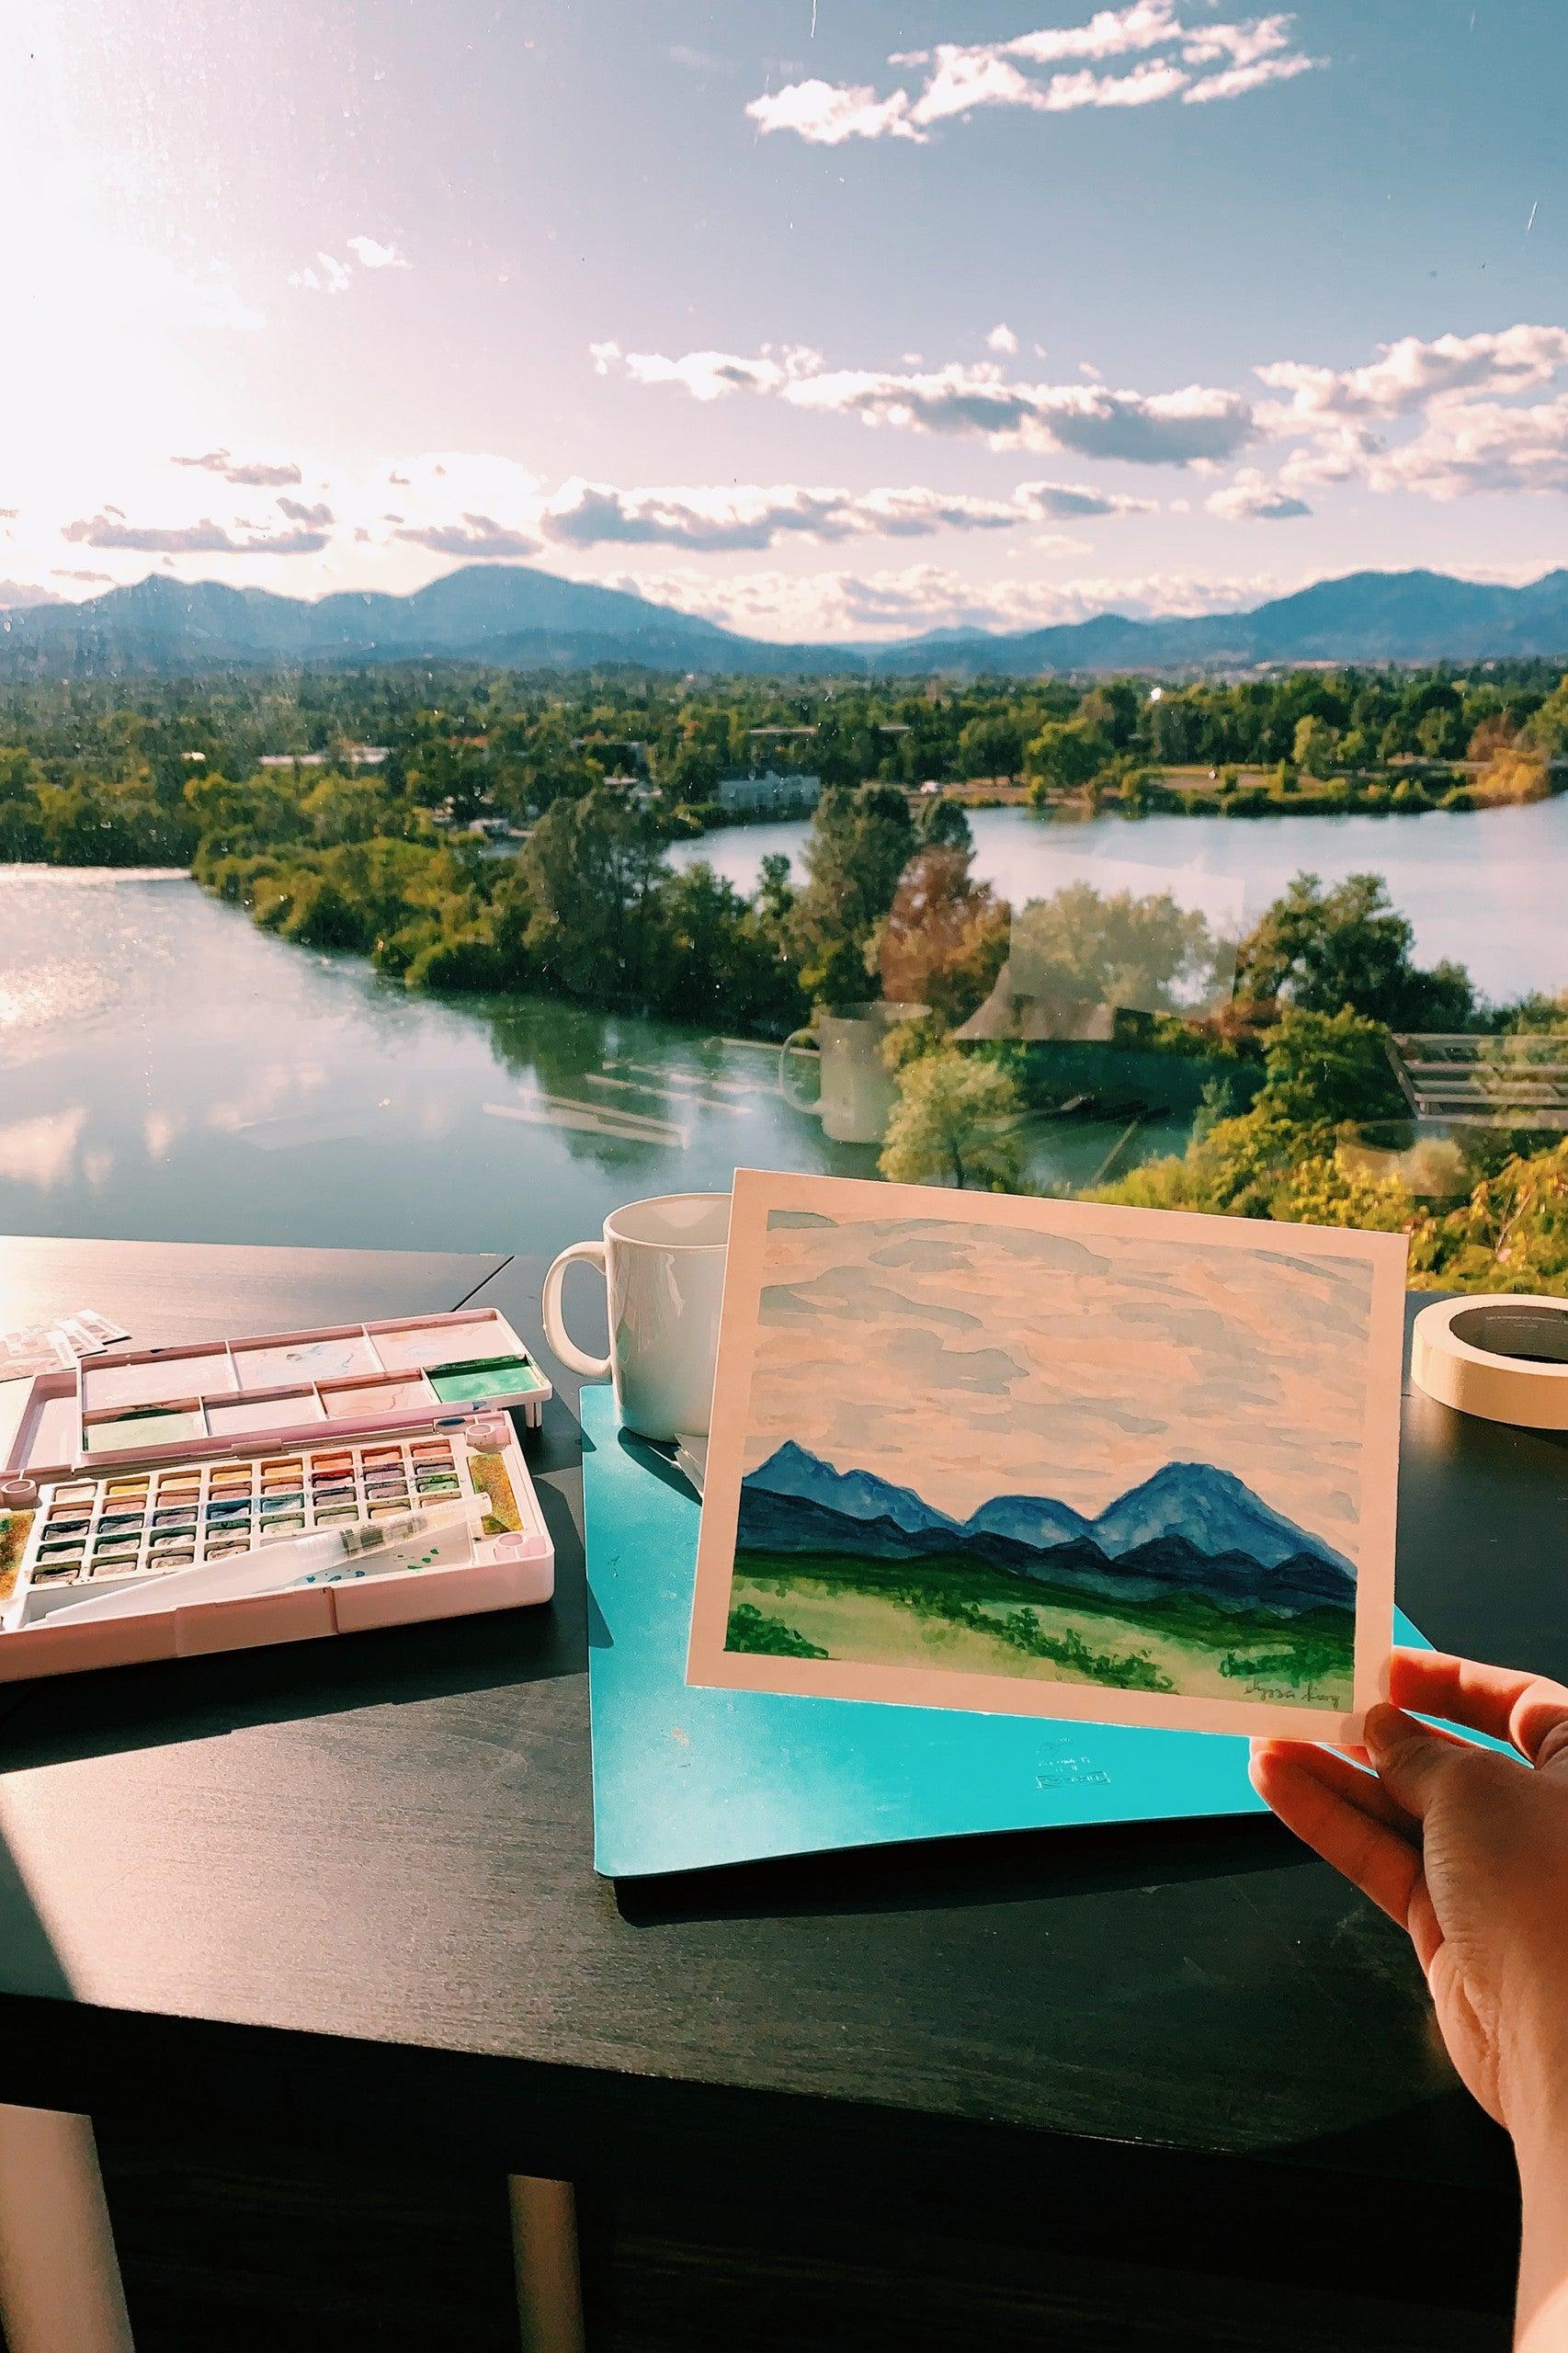 Pet Friendly Paint Redding Fun, Easy with Stunning Views